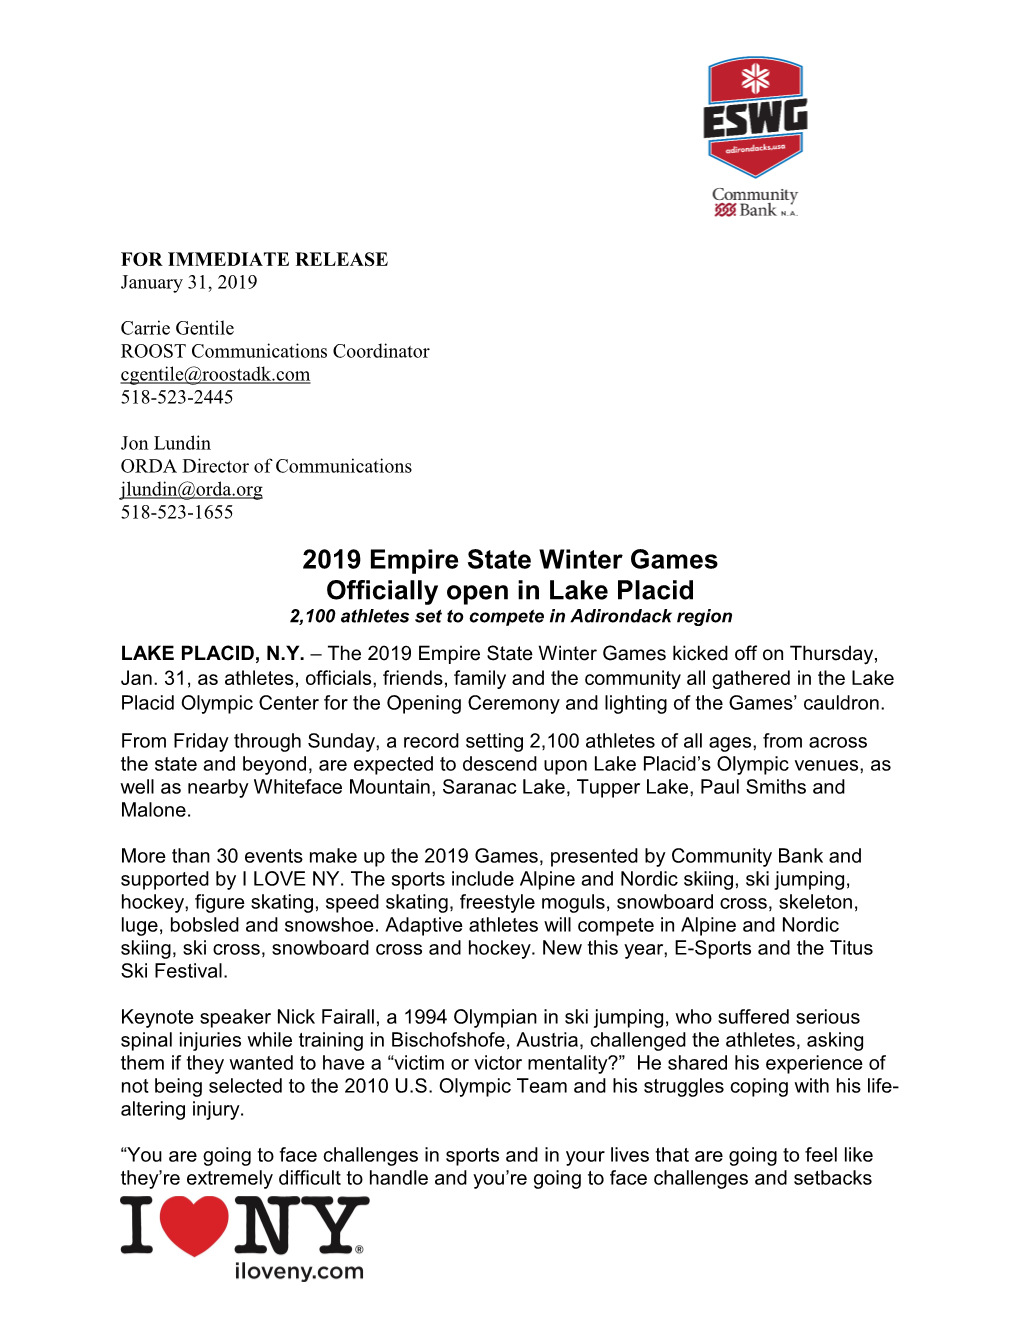 2019 Empire State Winter Games Officially Open in Lake Placid 2,100 Athletes Set to Compete in Adirondack Region LAKE PLACID, N.Y